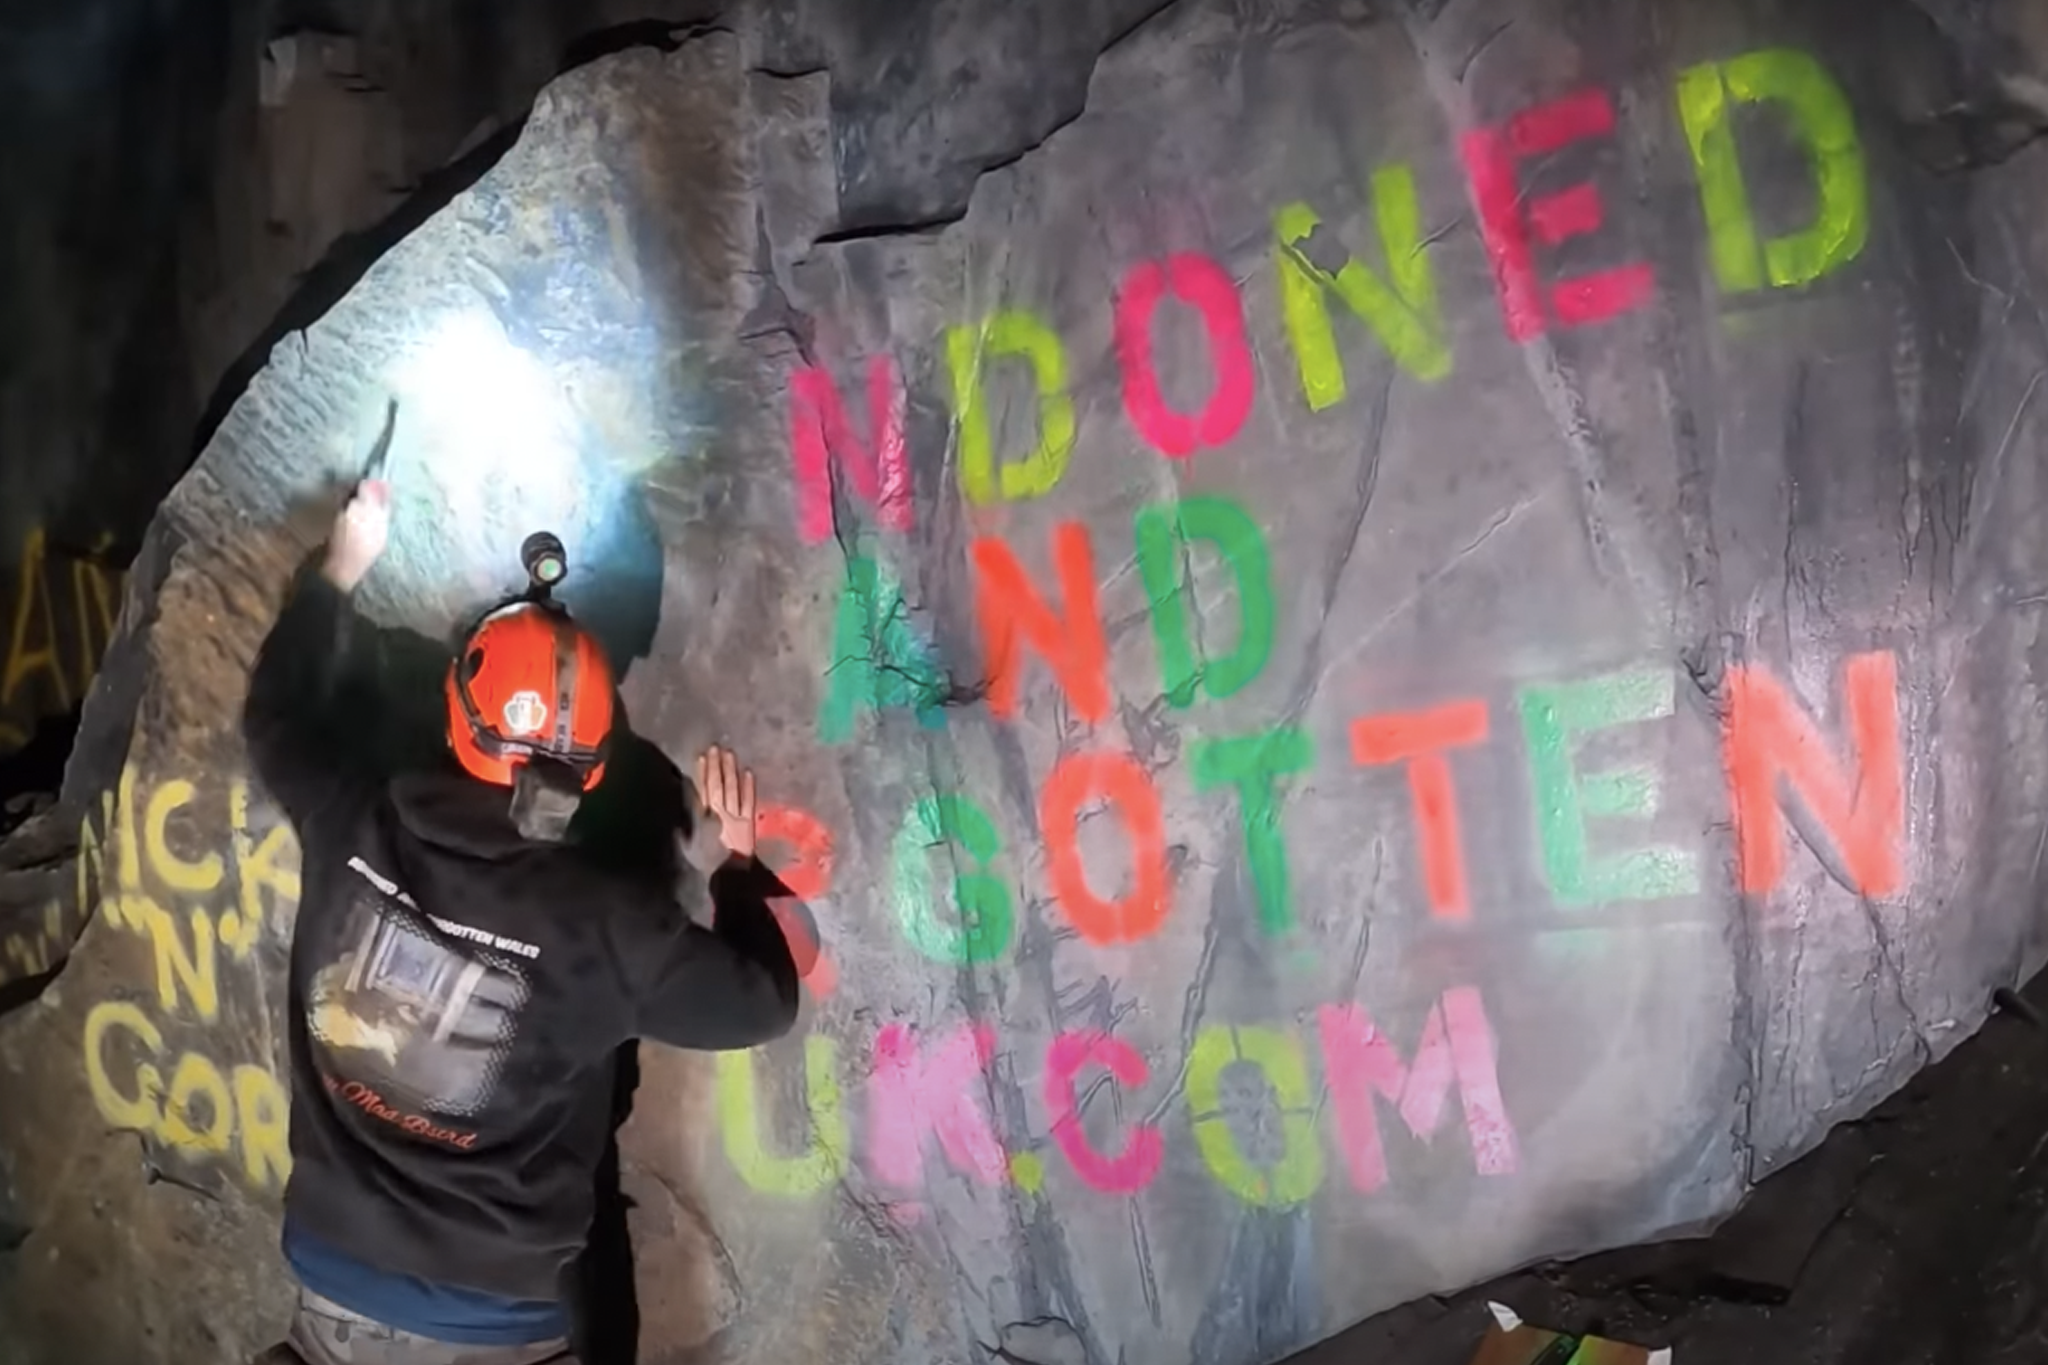 The cave was tagged with spray paint